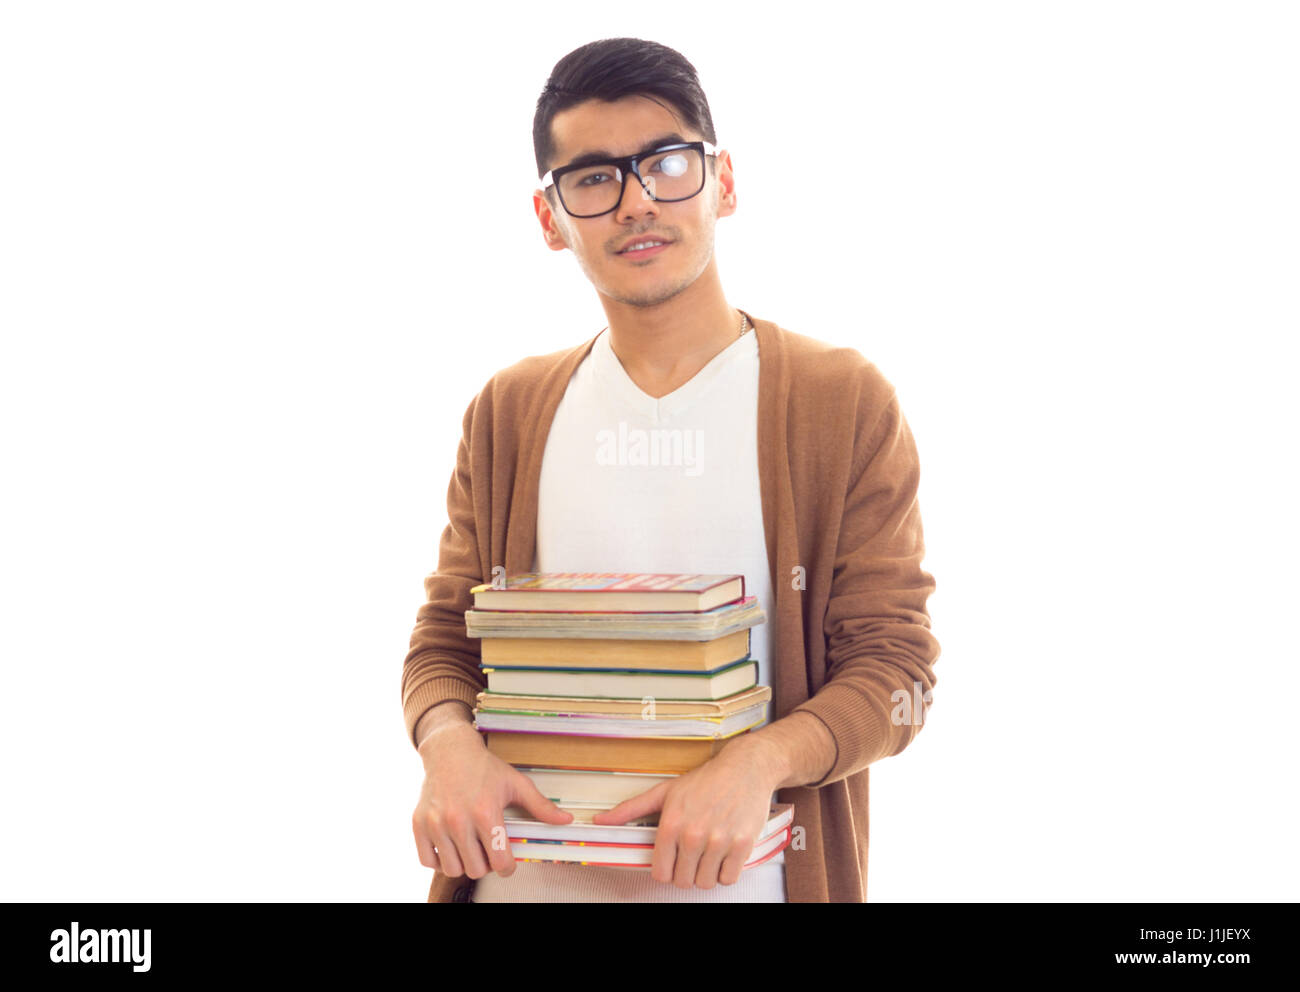 Young man in glasses with books Stock Photo